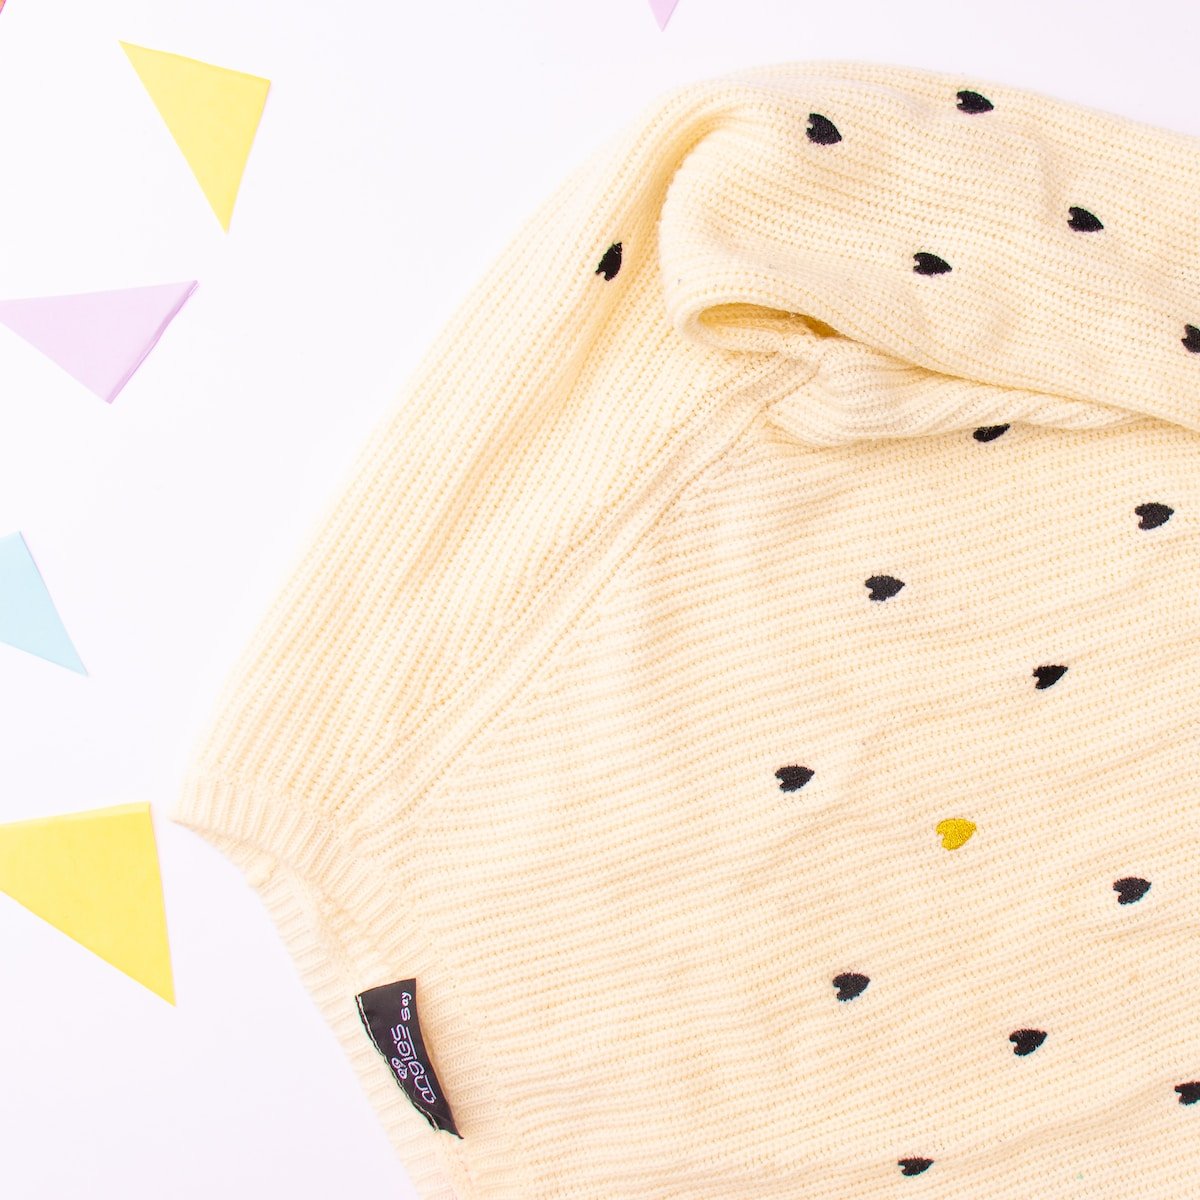 a yellow sweater with black dots on it